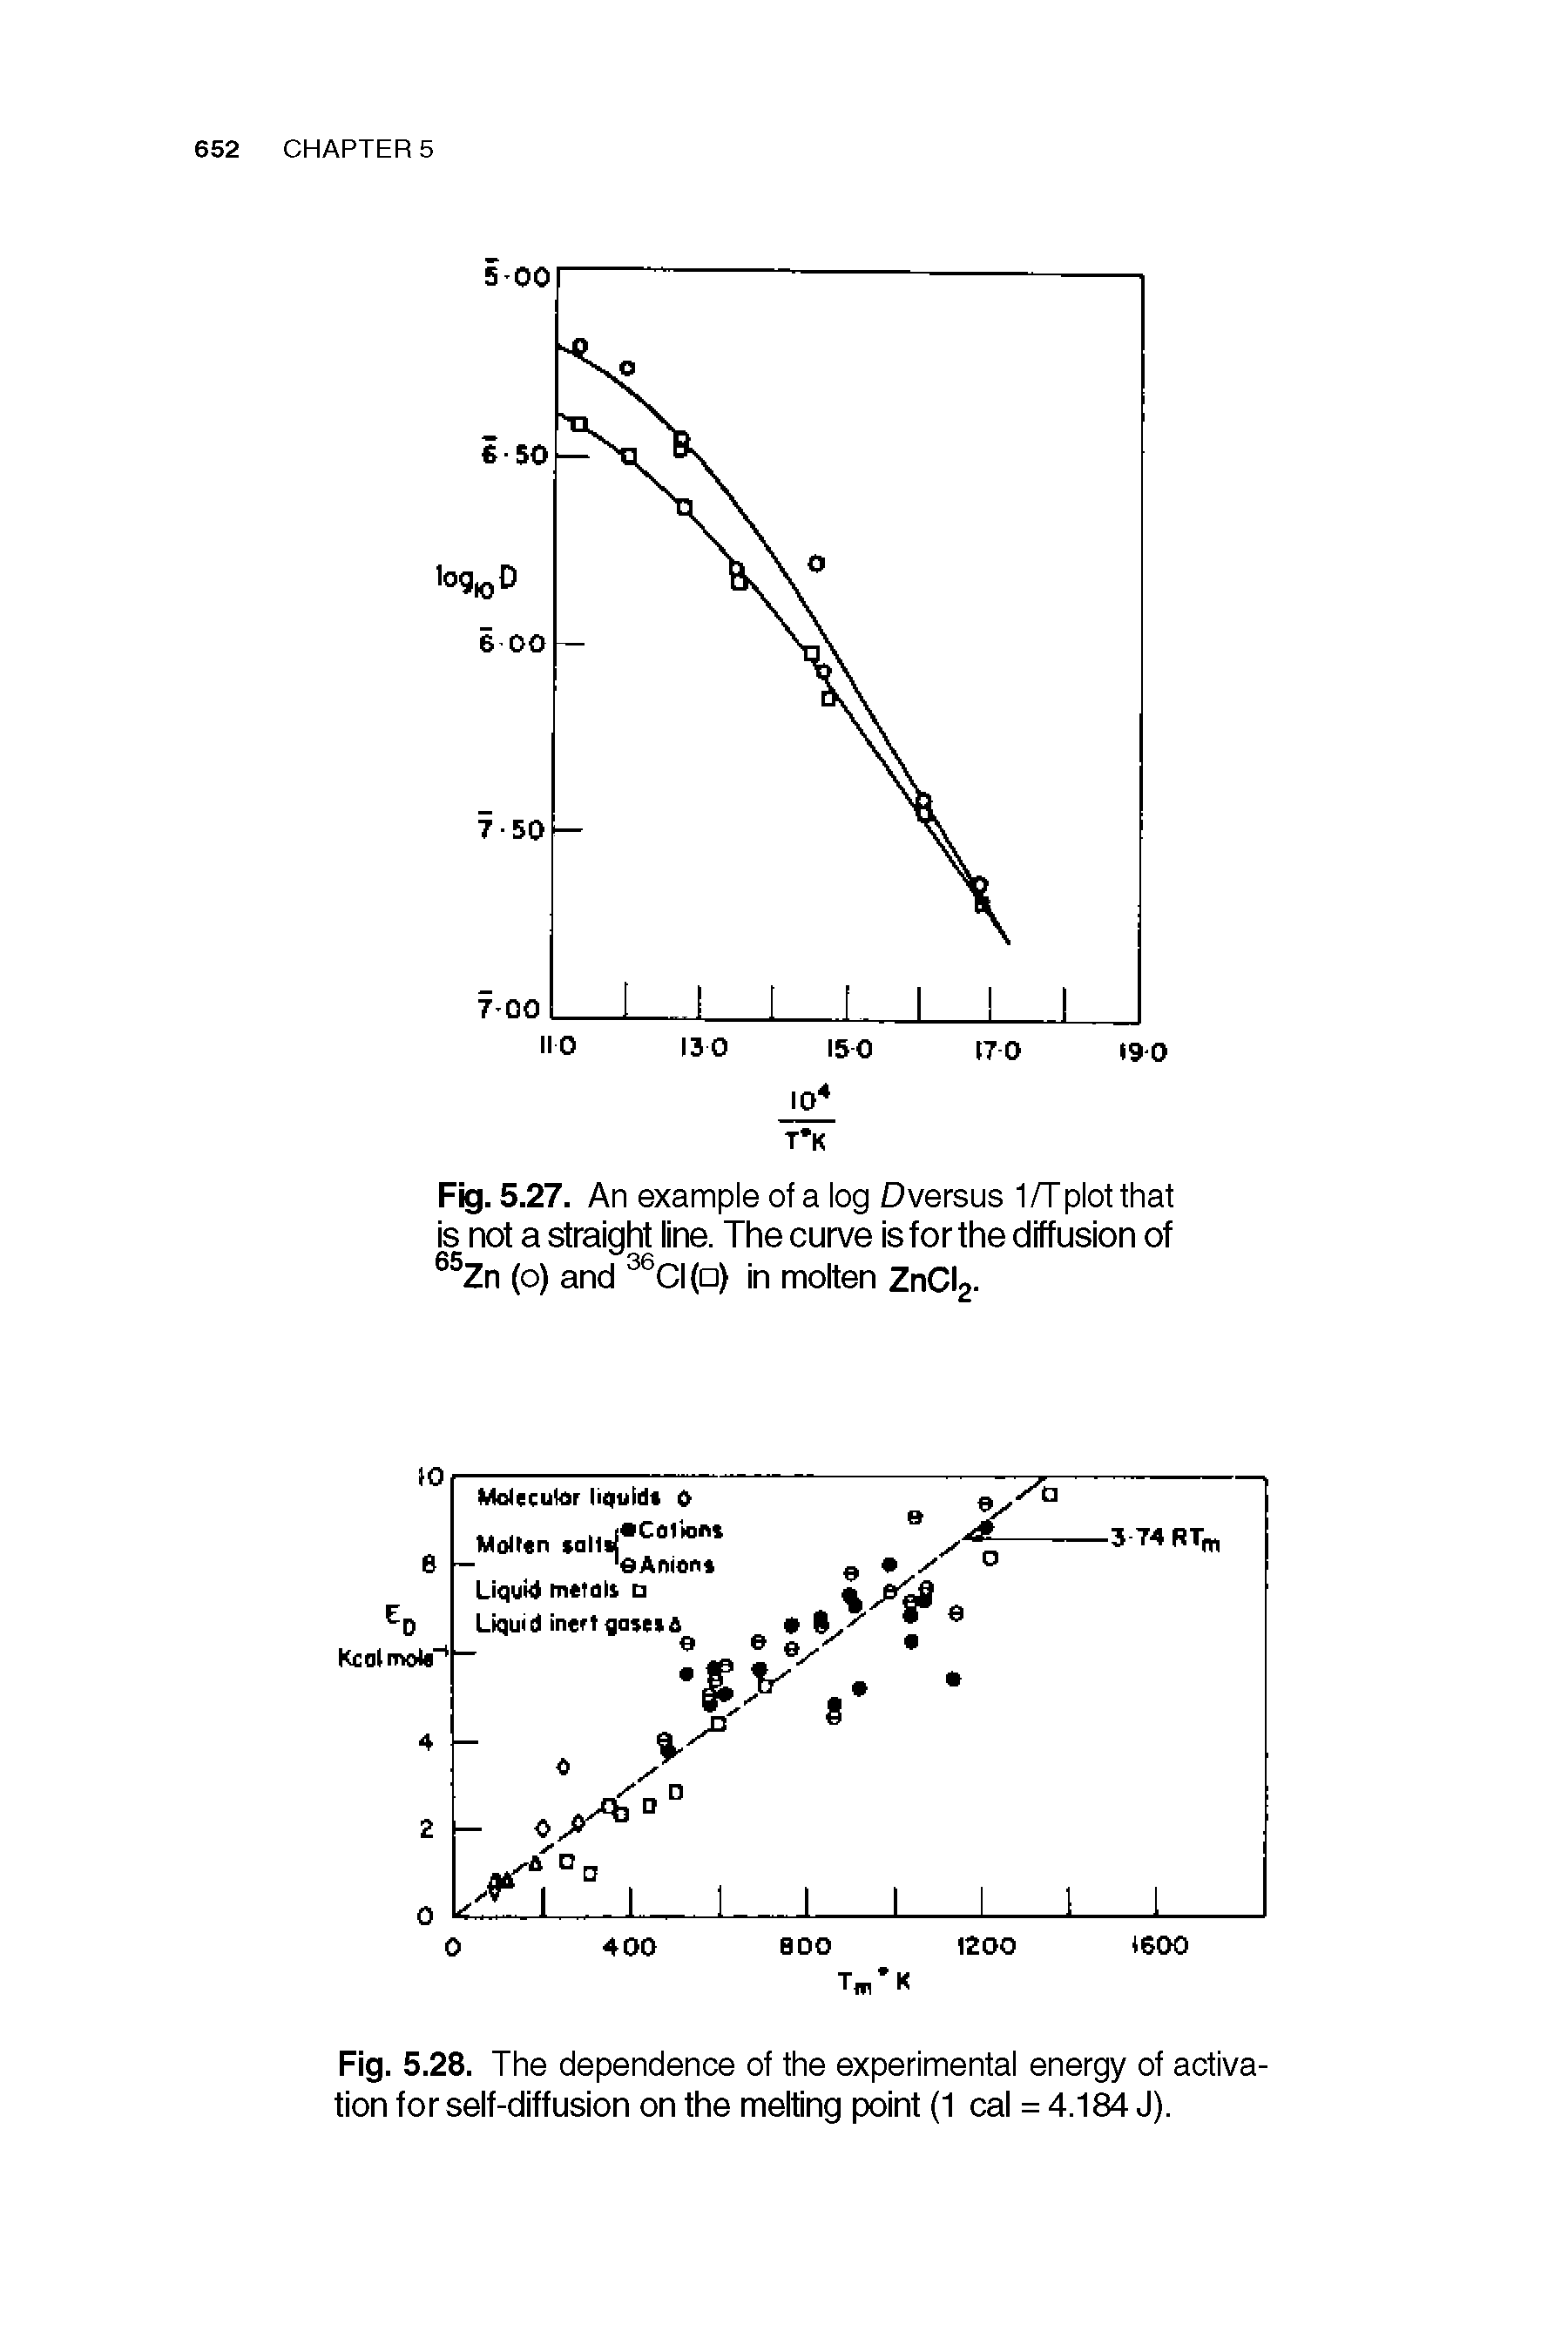 Fig. 5.28. The dependence of the experimental energy of activation for self-diffusion on the melting point (1 cal = 4.184 J).